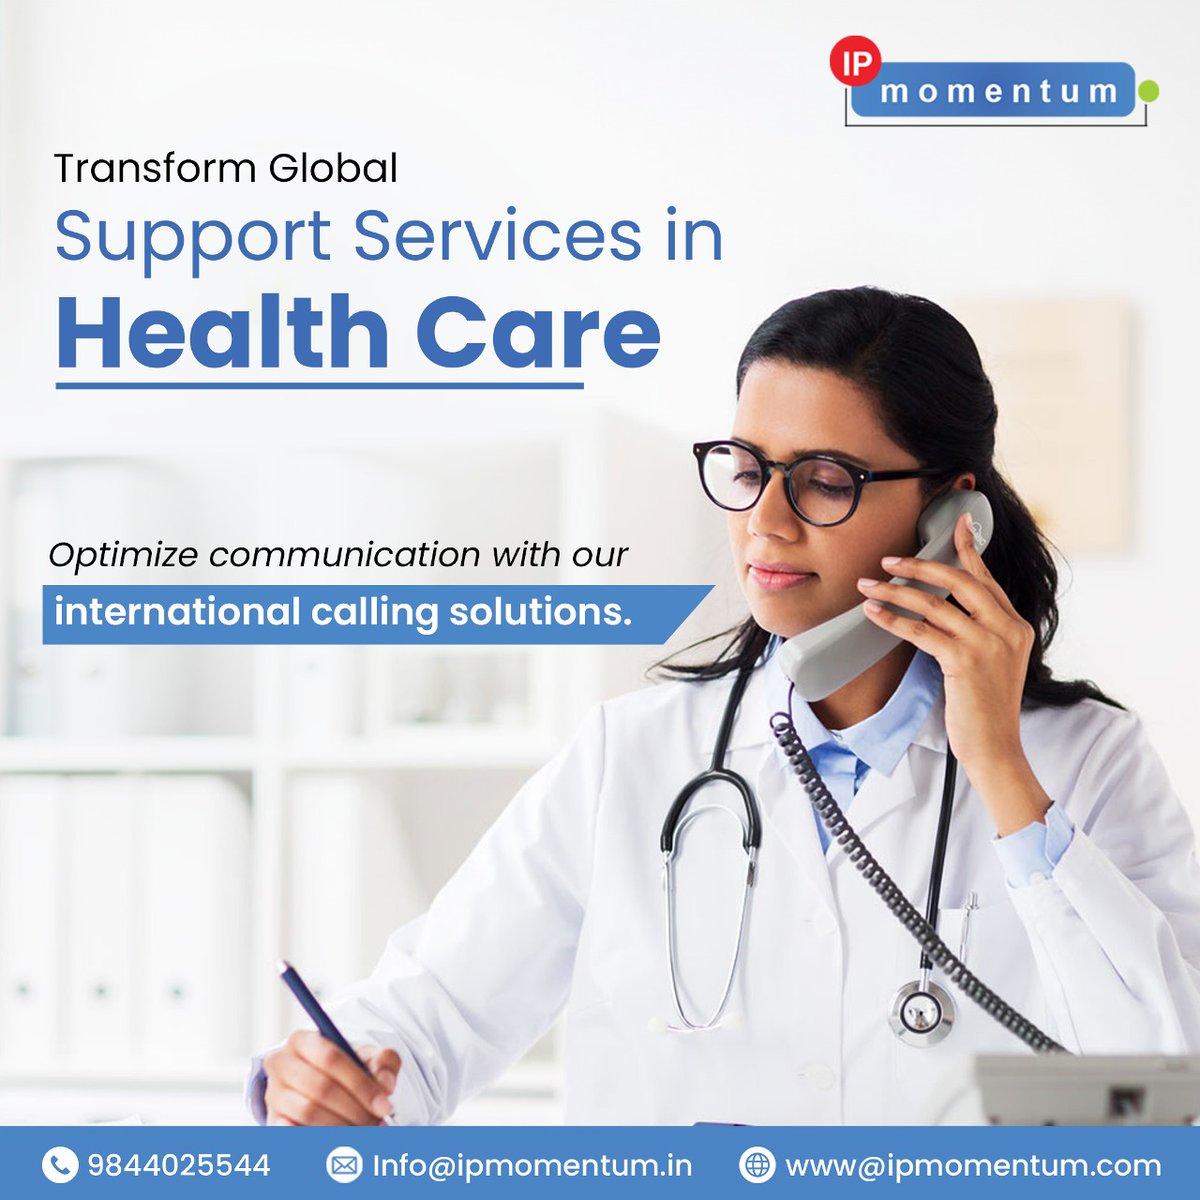 Revolutionizing global healthcare support! 🌍 With IP Momentum's international calling solutions, optimize communication for seamless operations. Contact us: 9844025544 📞 Visit us at ipmomentum.com #HealthcareSupport #GlobalServices #IPMomentum